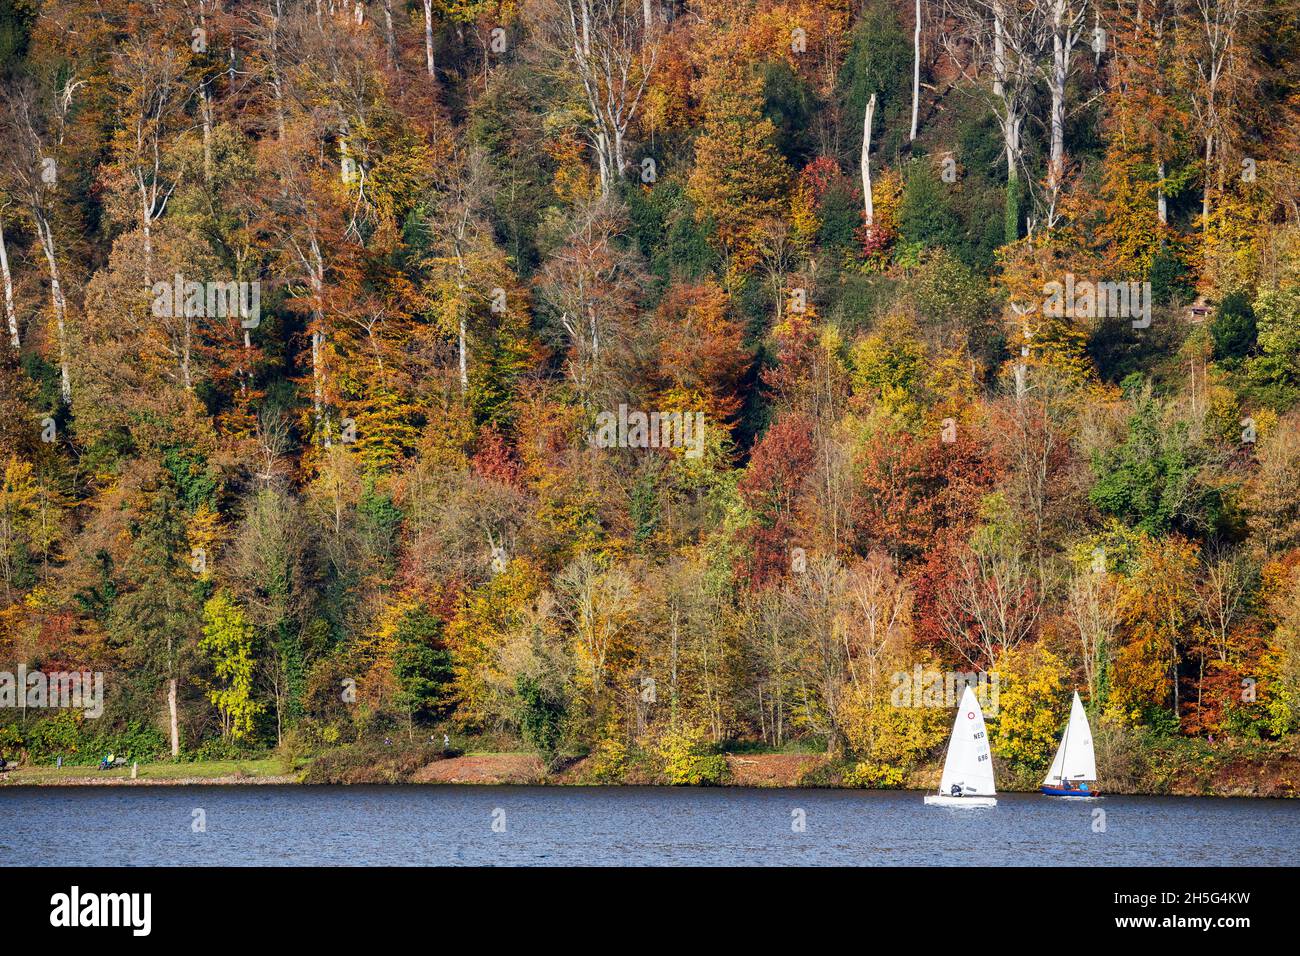 Two small sailboats on Lake Baldeney, Baldeneysee, against the backdrop of an autumnal forest with colourful foliage, Essen, Germany Stock Photo